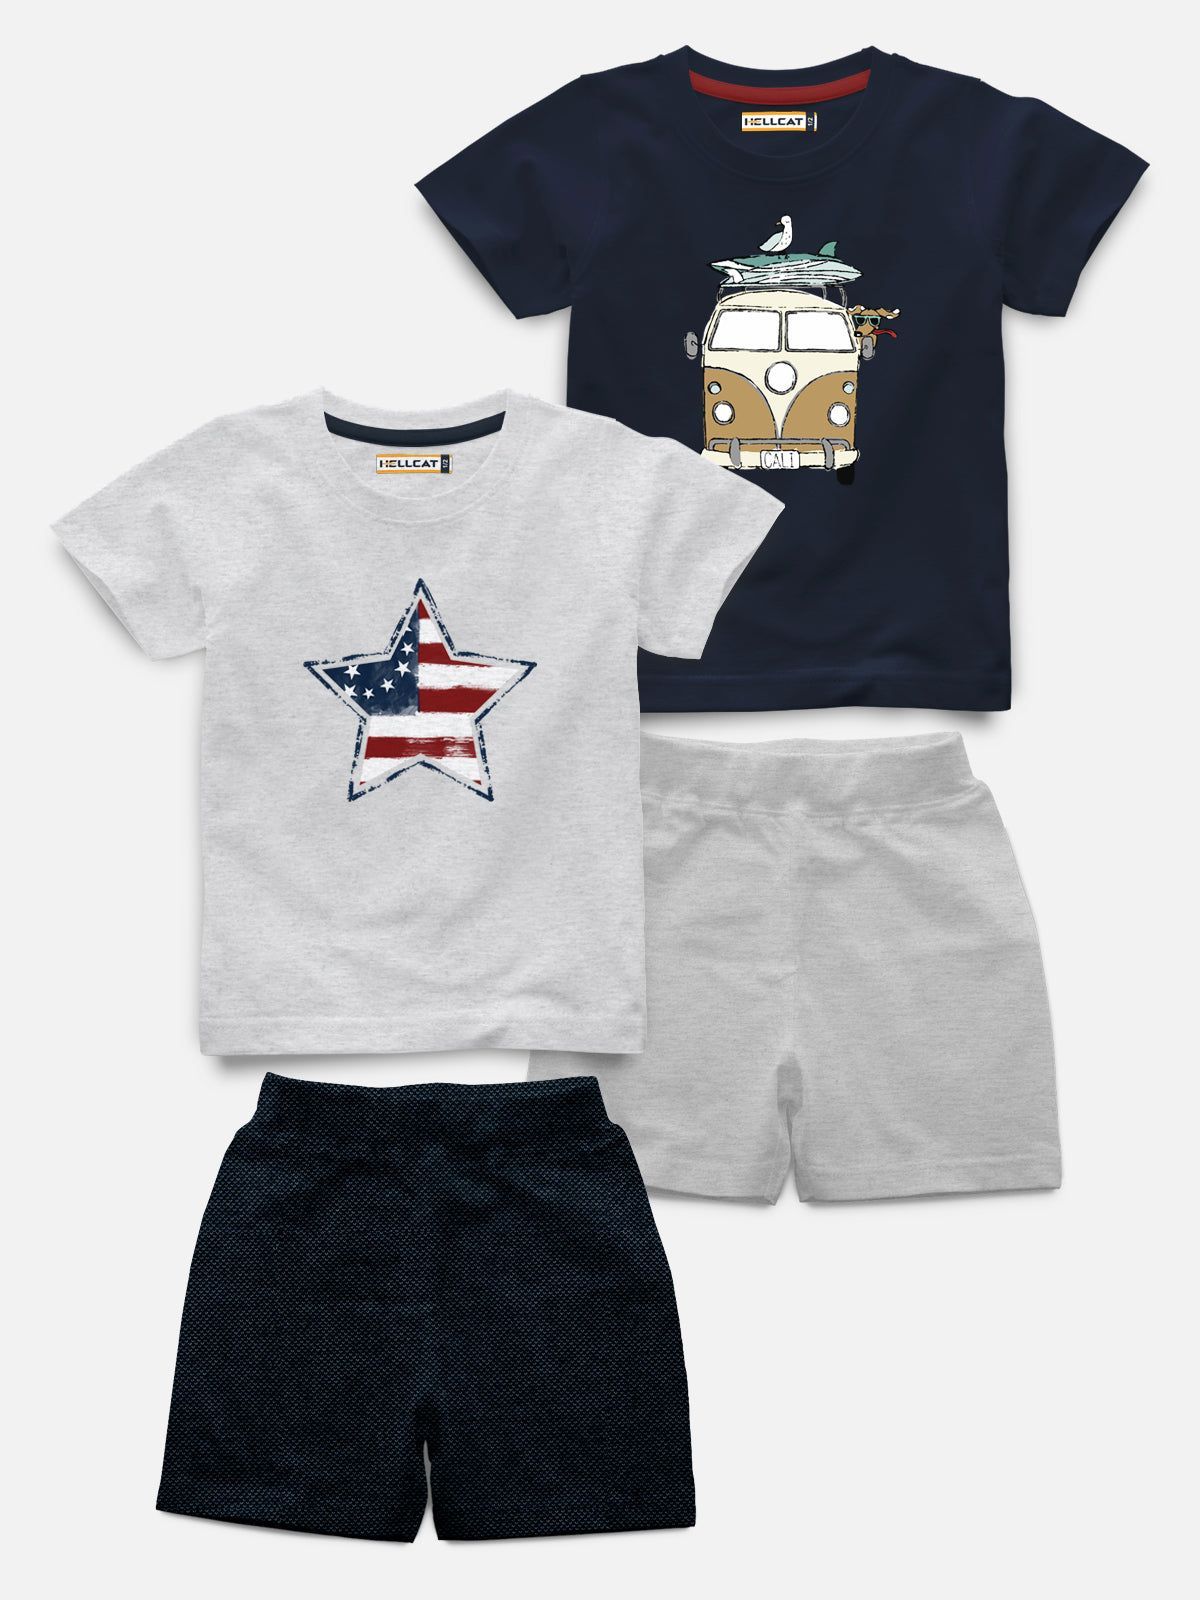 Half Sleeve Printed Tshirt with Comfy Solid Shorts for Infants & Toddler - Pack of 4 (2 T-shirt & 2 short)